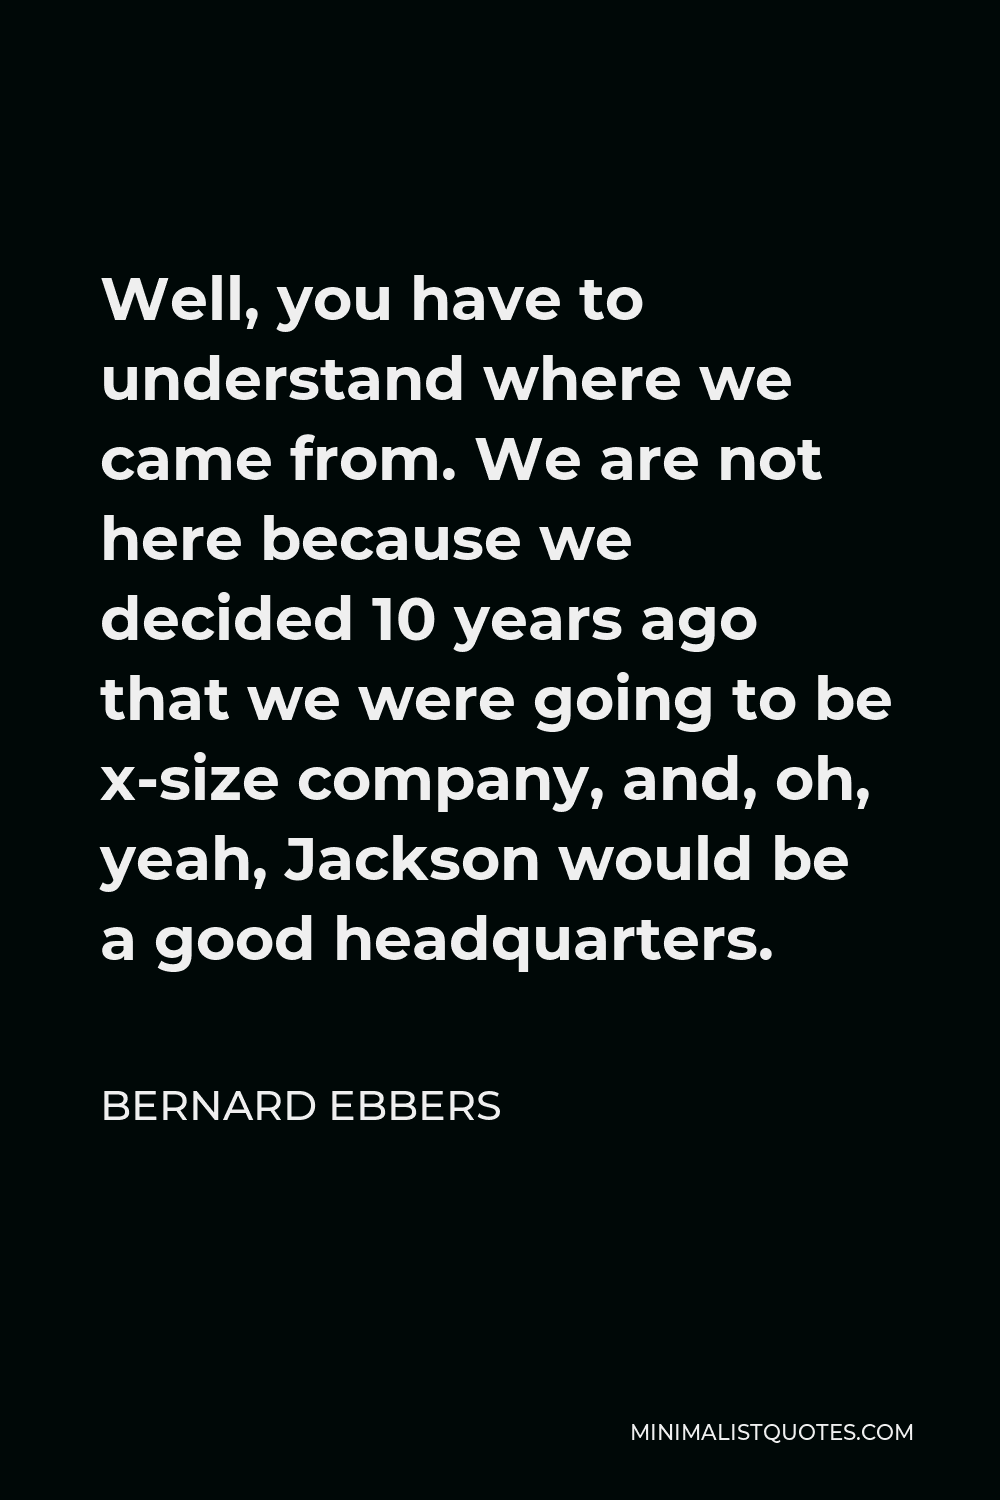 Bernard Ebbers Quote - Well, you have to understand where we came from. We are not here because we decided 10 years ago that we were going to be x-size company, and, oh, yeah, Jackson would be a good headquarters.